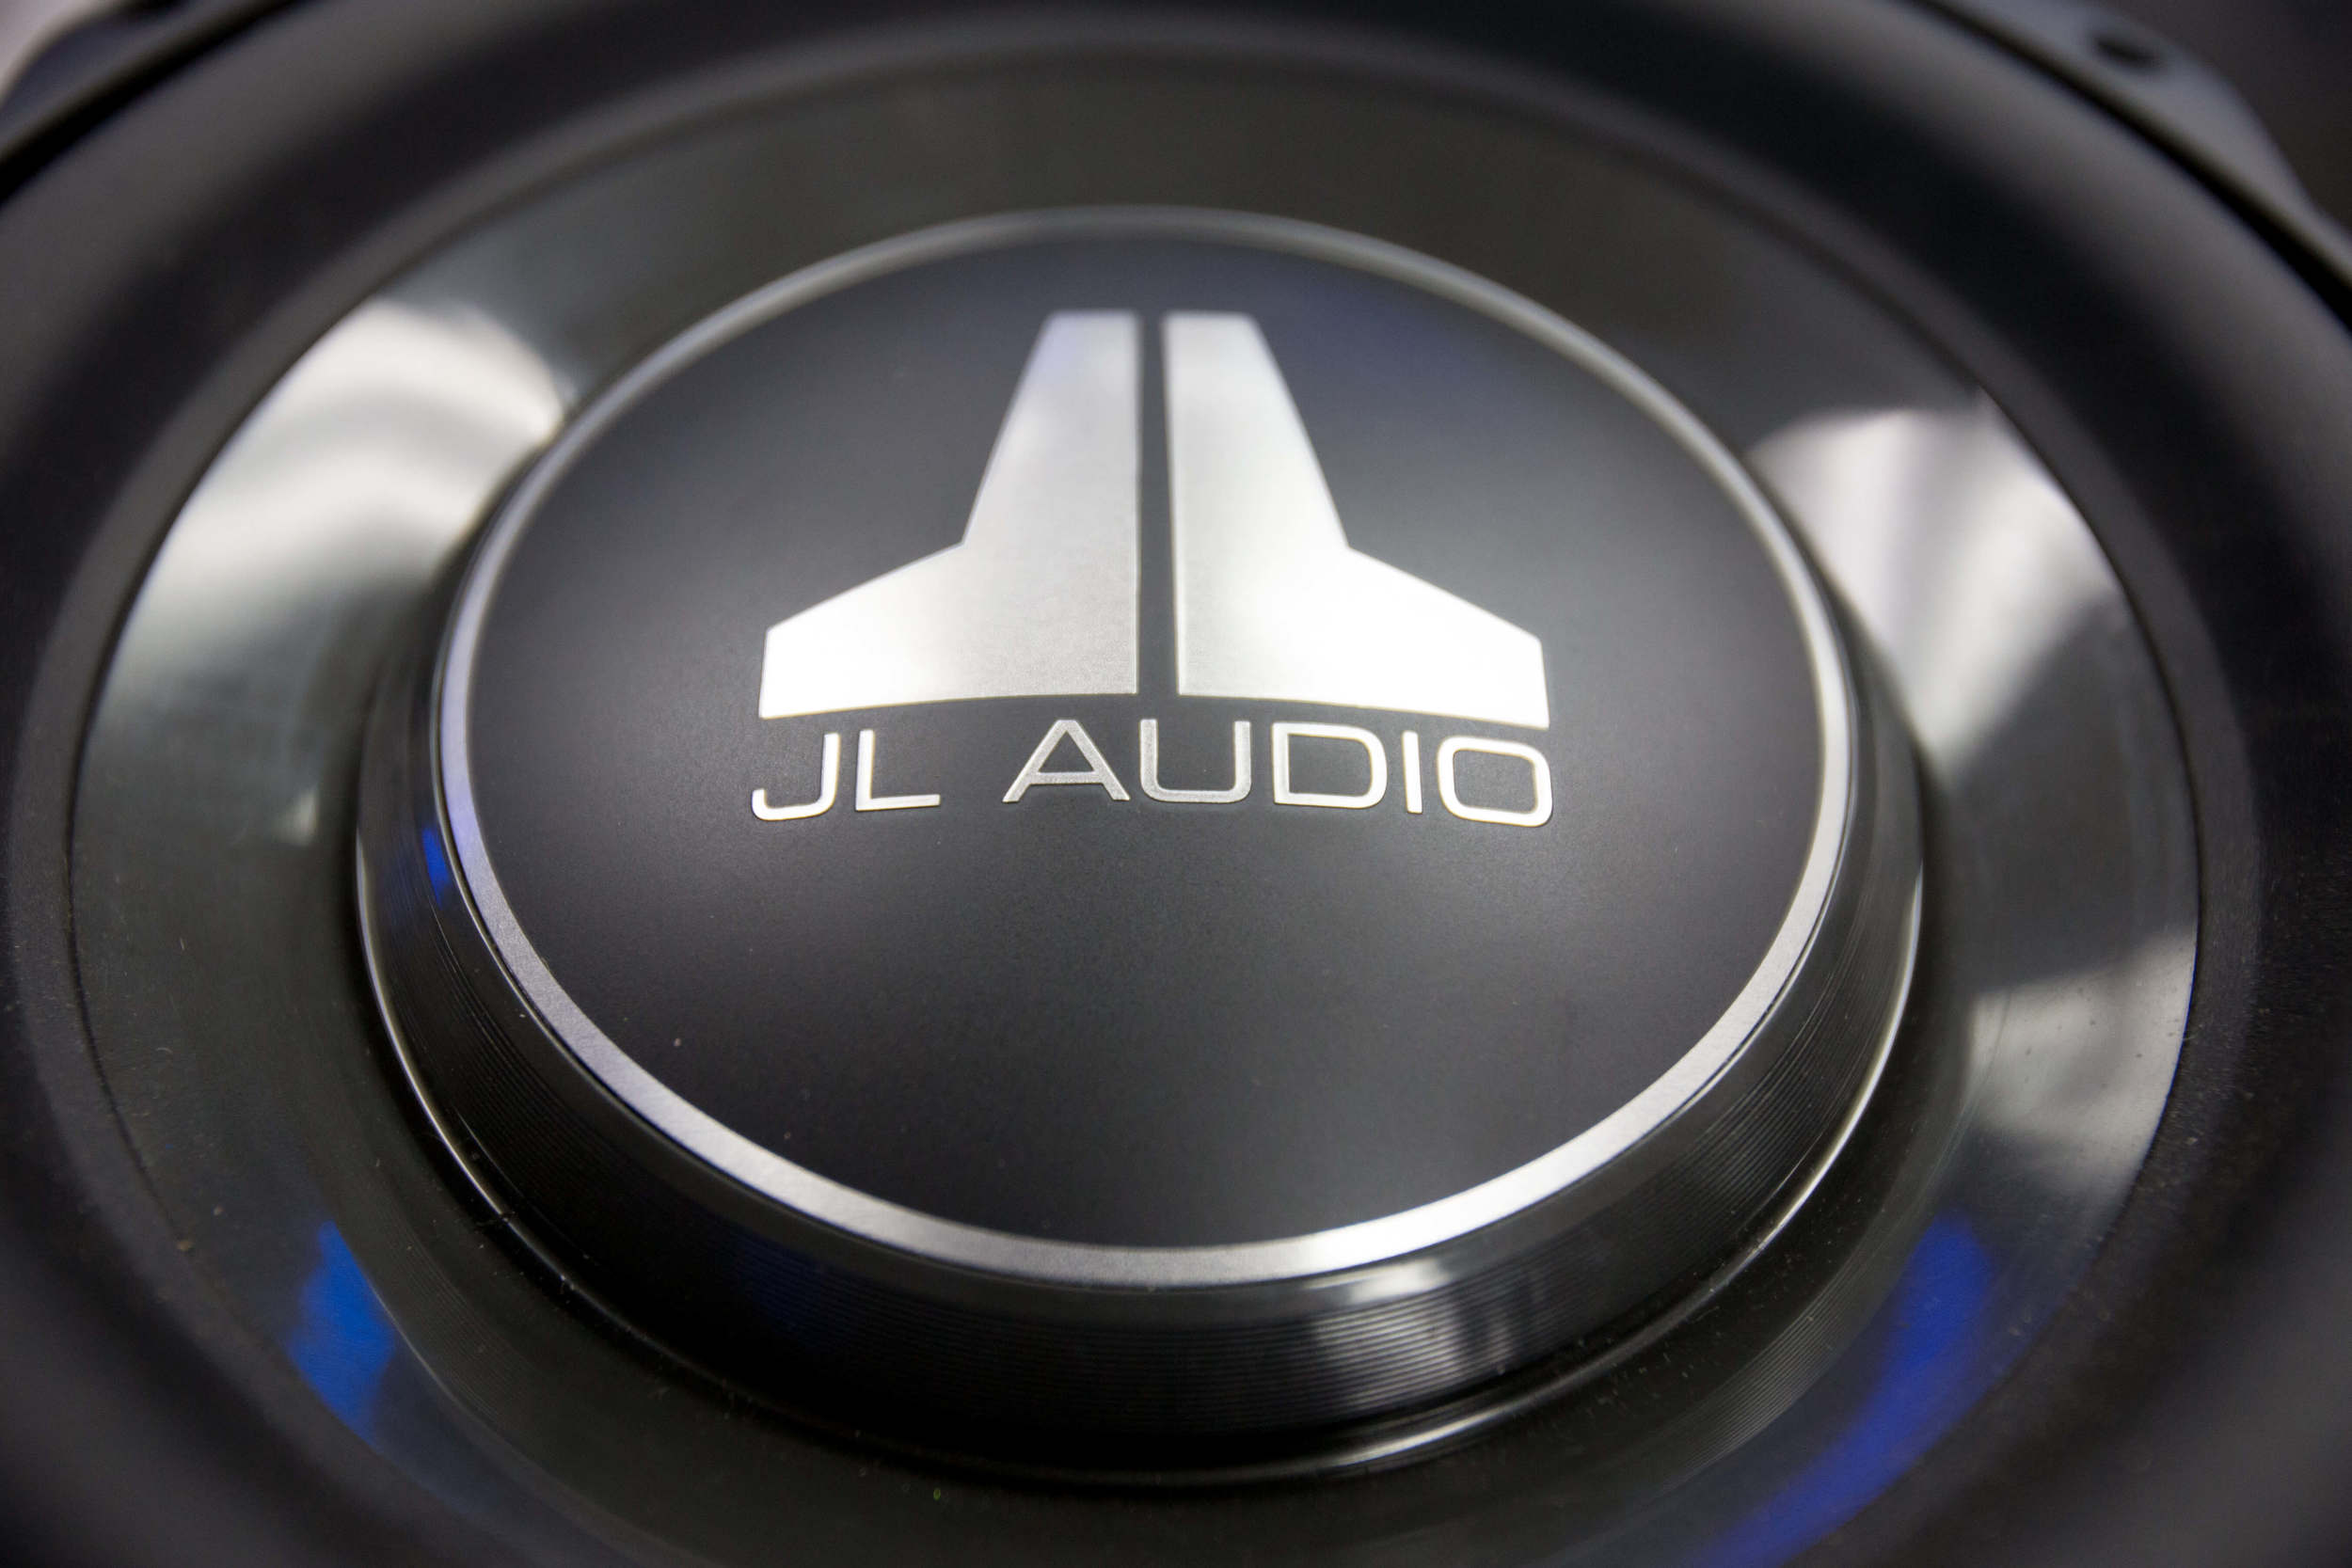 JL Audio Speakers and Stereo